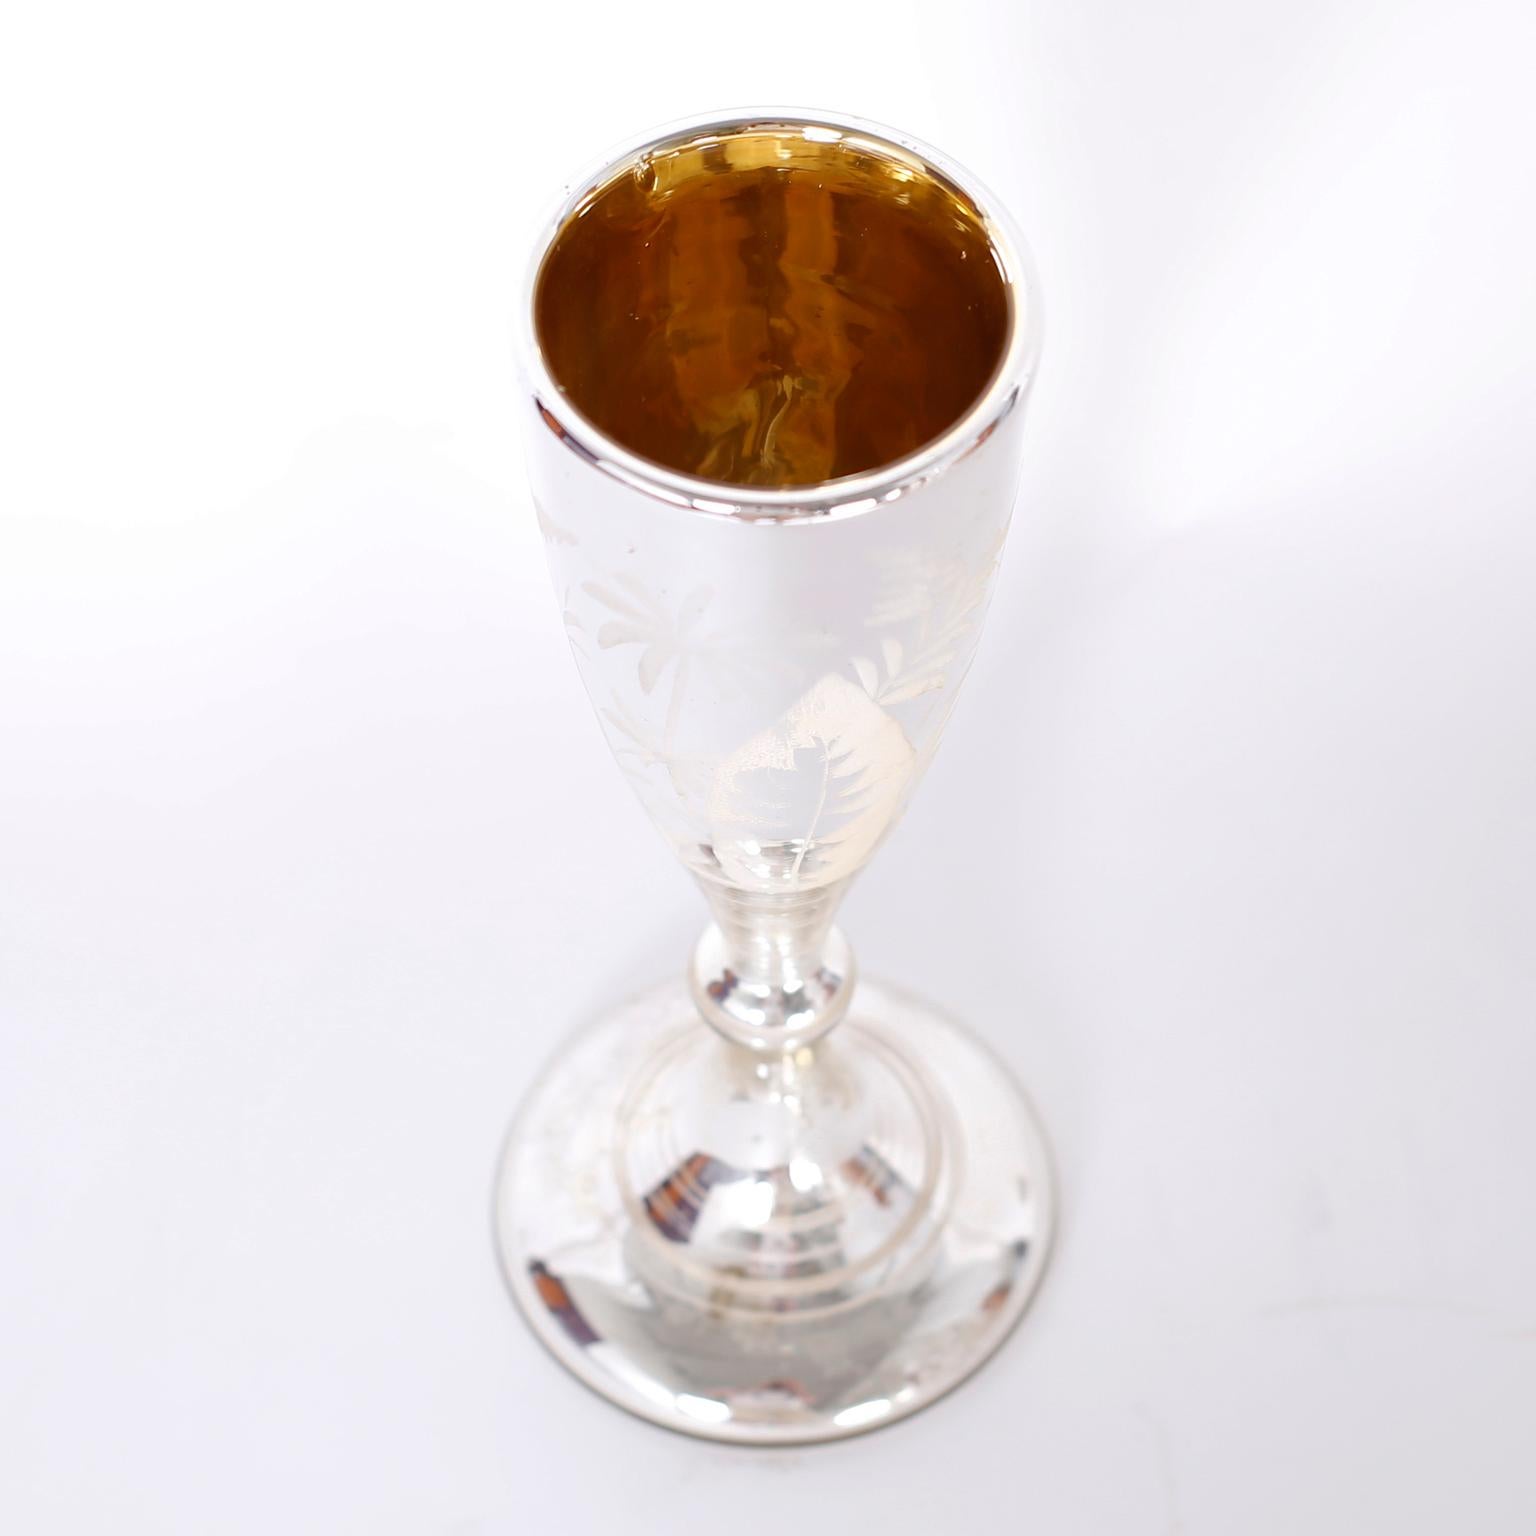 Enchanting antique mercury glass goblet with Classic form and featuring acid etched tropical designs and a gold tone interior.